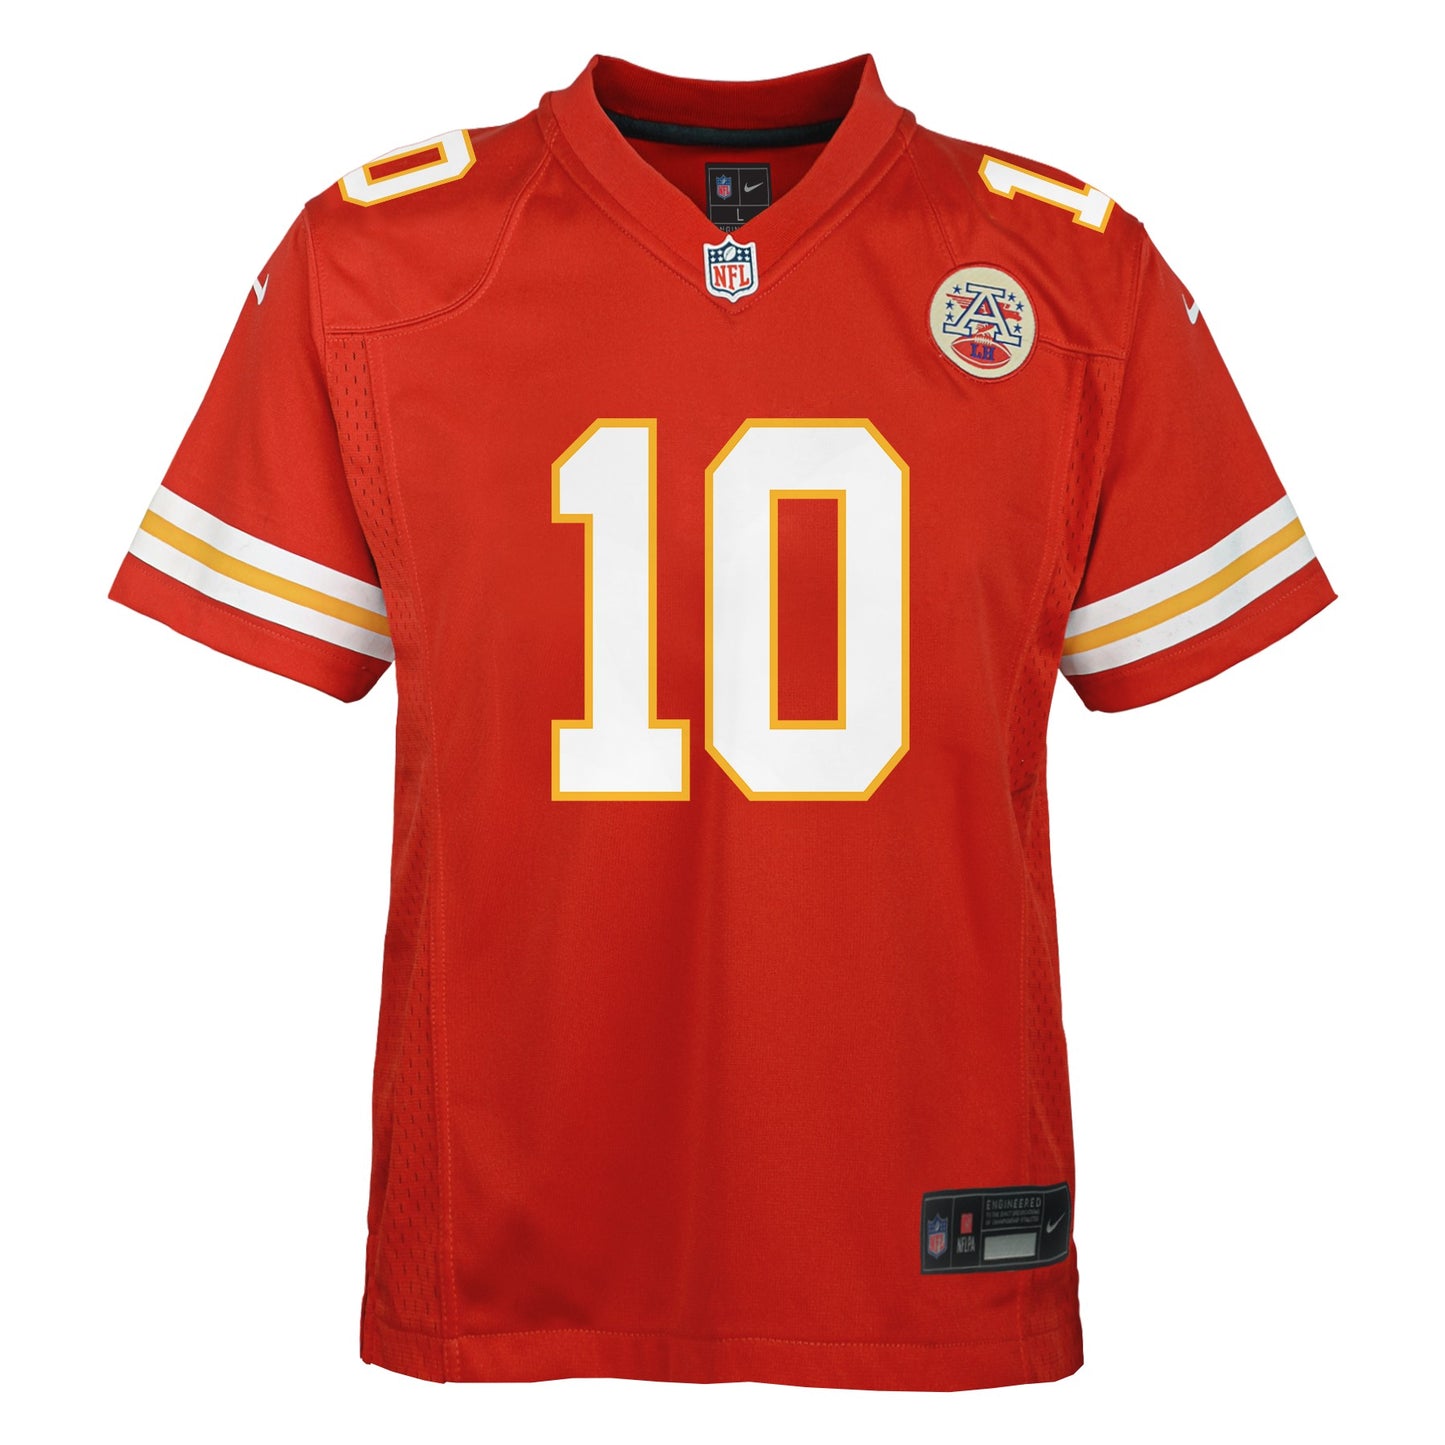 Youth Kansas City Chiefs Isiah Pacheco Nike Red Game Jersey